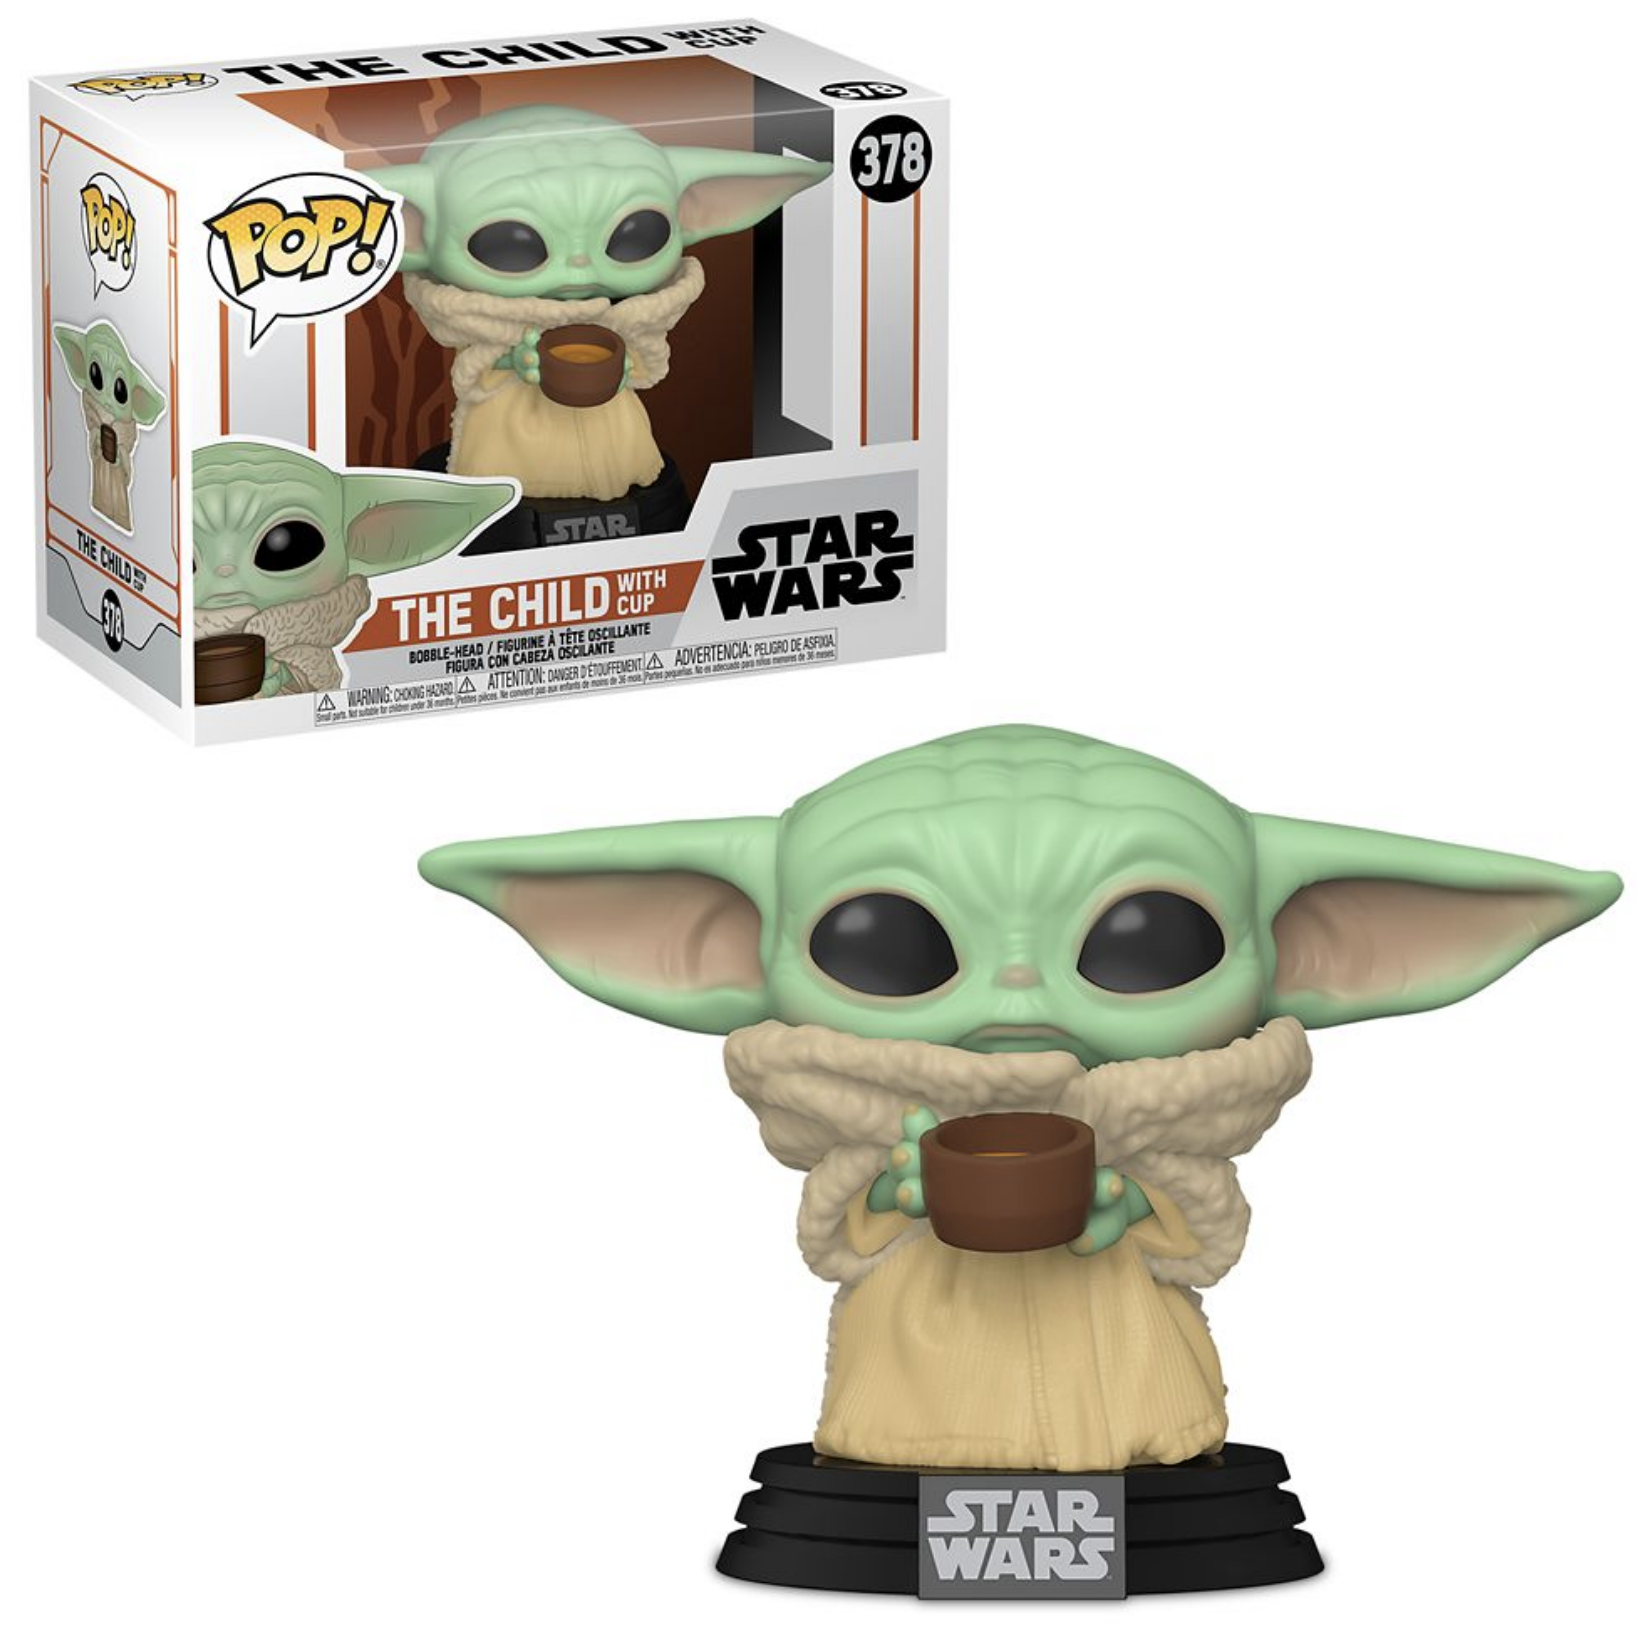 Funko Pop Star Wars The Mandalorian The Child with cup #378 BABY YODA 